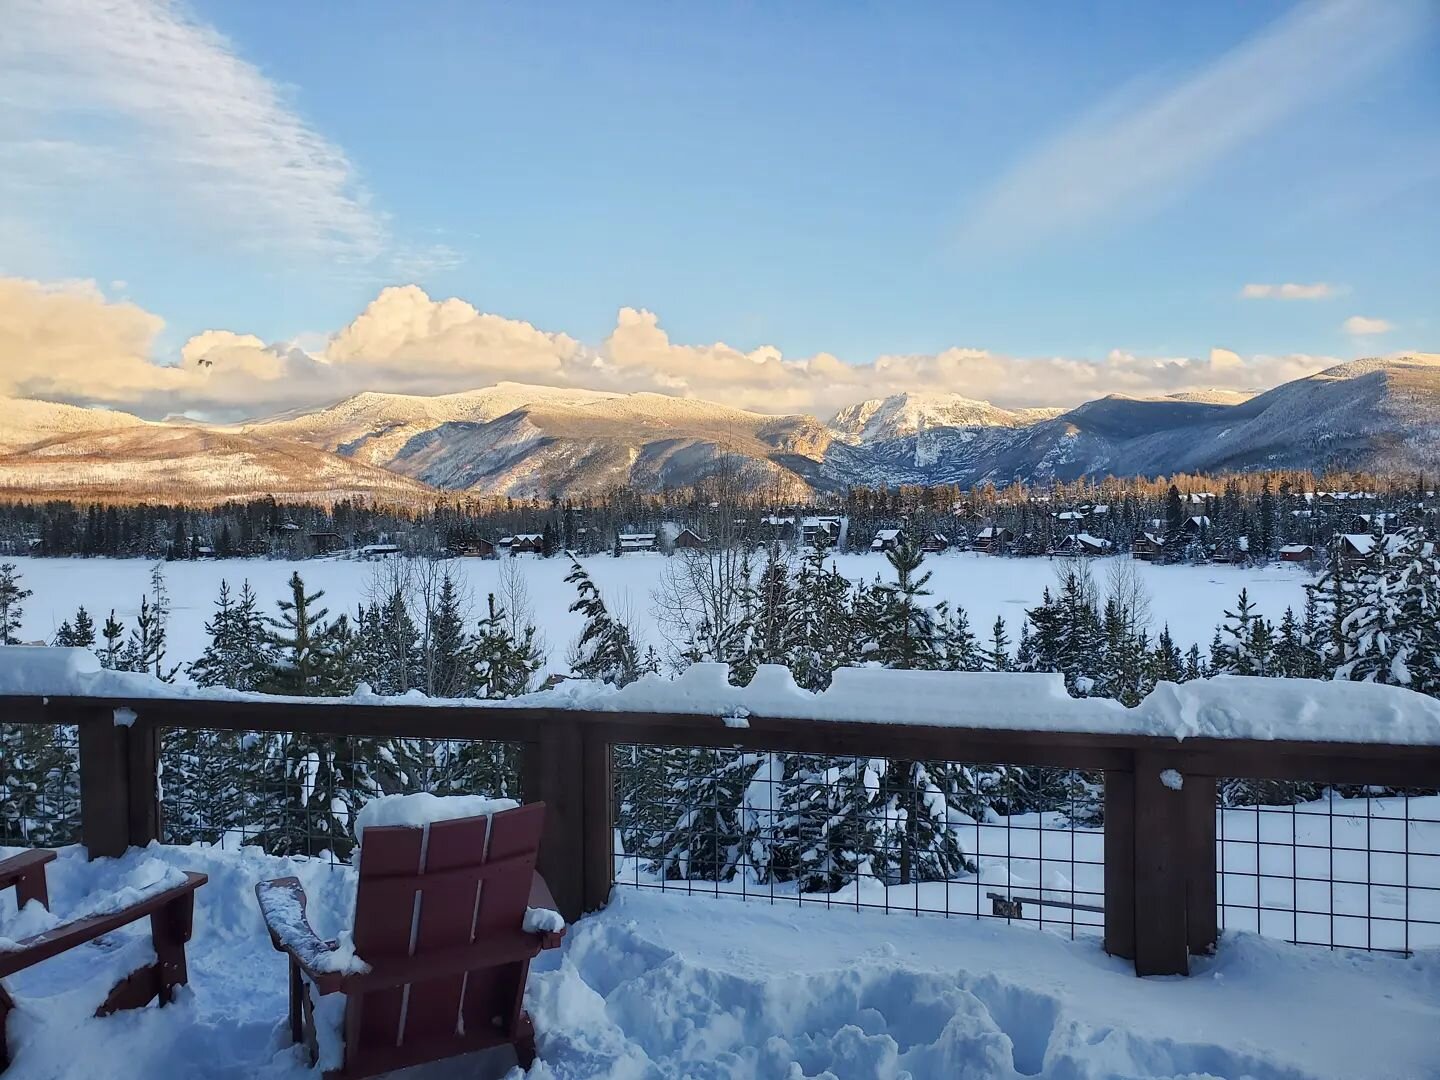 I'd say we had a snowy, white Christmas in our cabin! Couldn't have asked for better views or a better time 🥰🎄

#nofilter #colorado #coloradochristmas #whitechristmas #mountains #grandlake